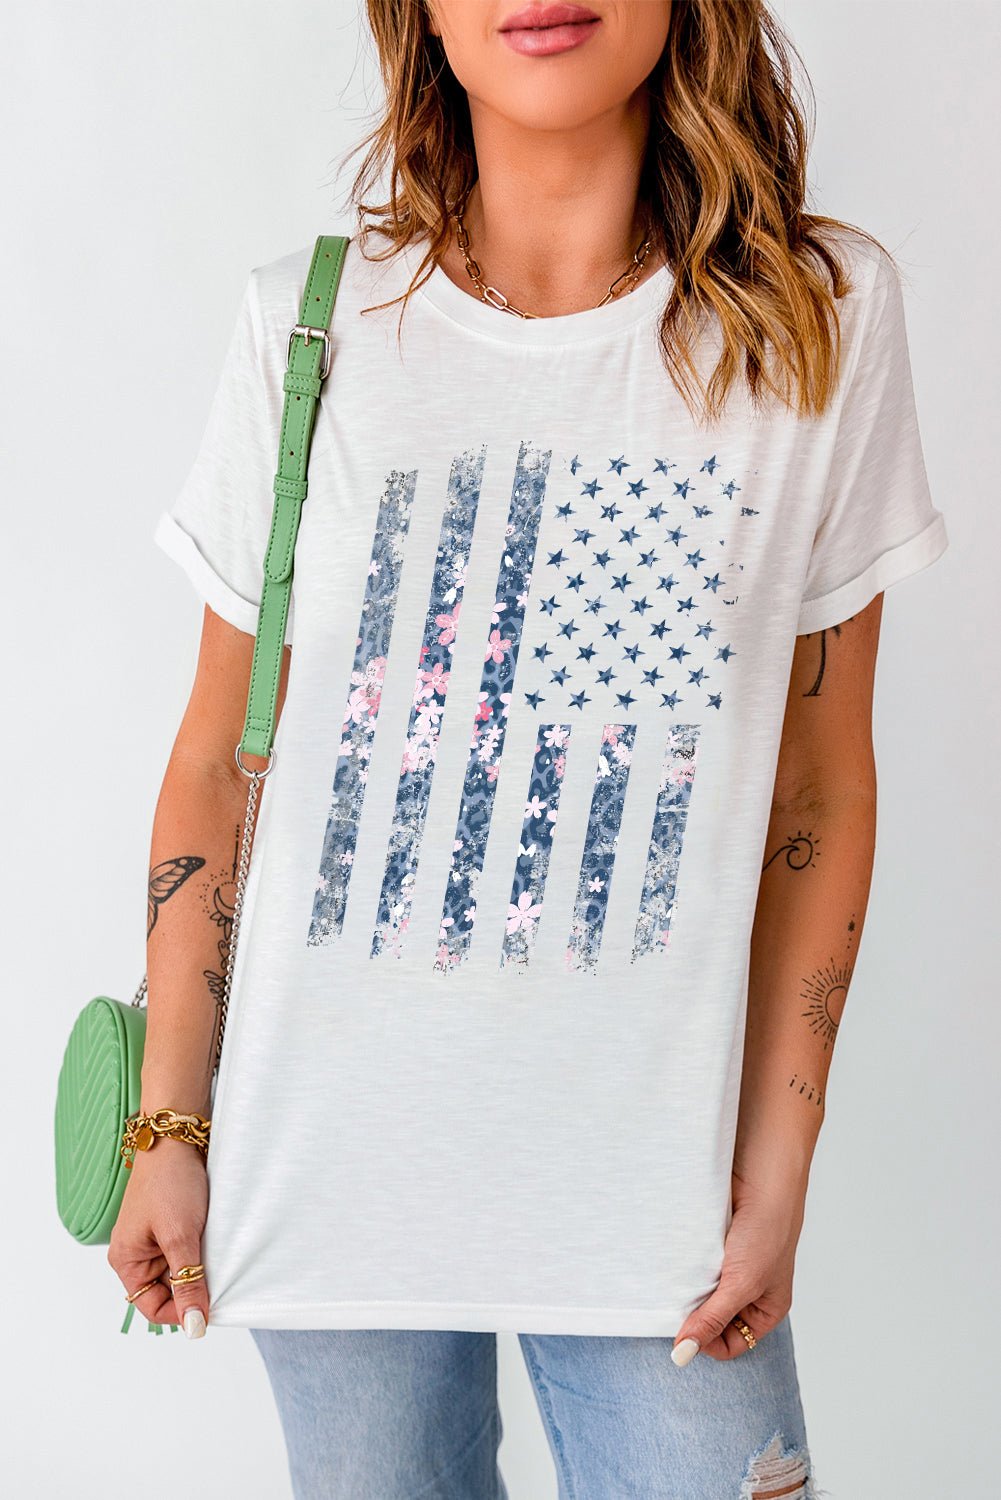 Stars and Stripes Graphic Tee - OMG! Rose